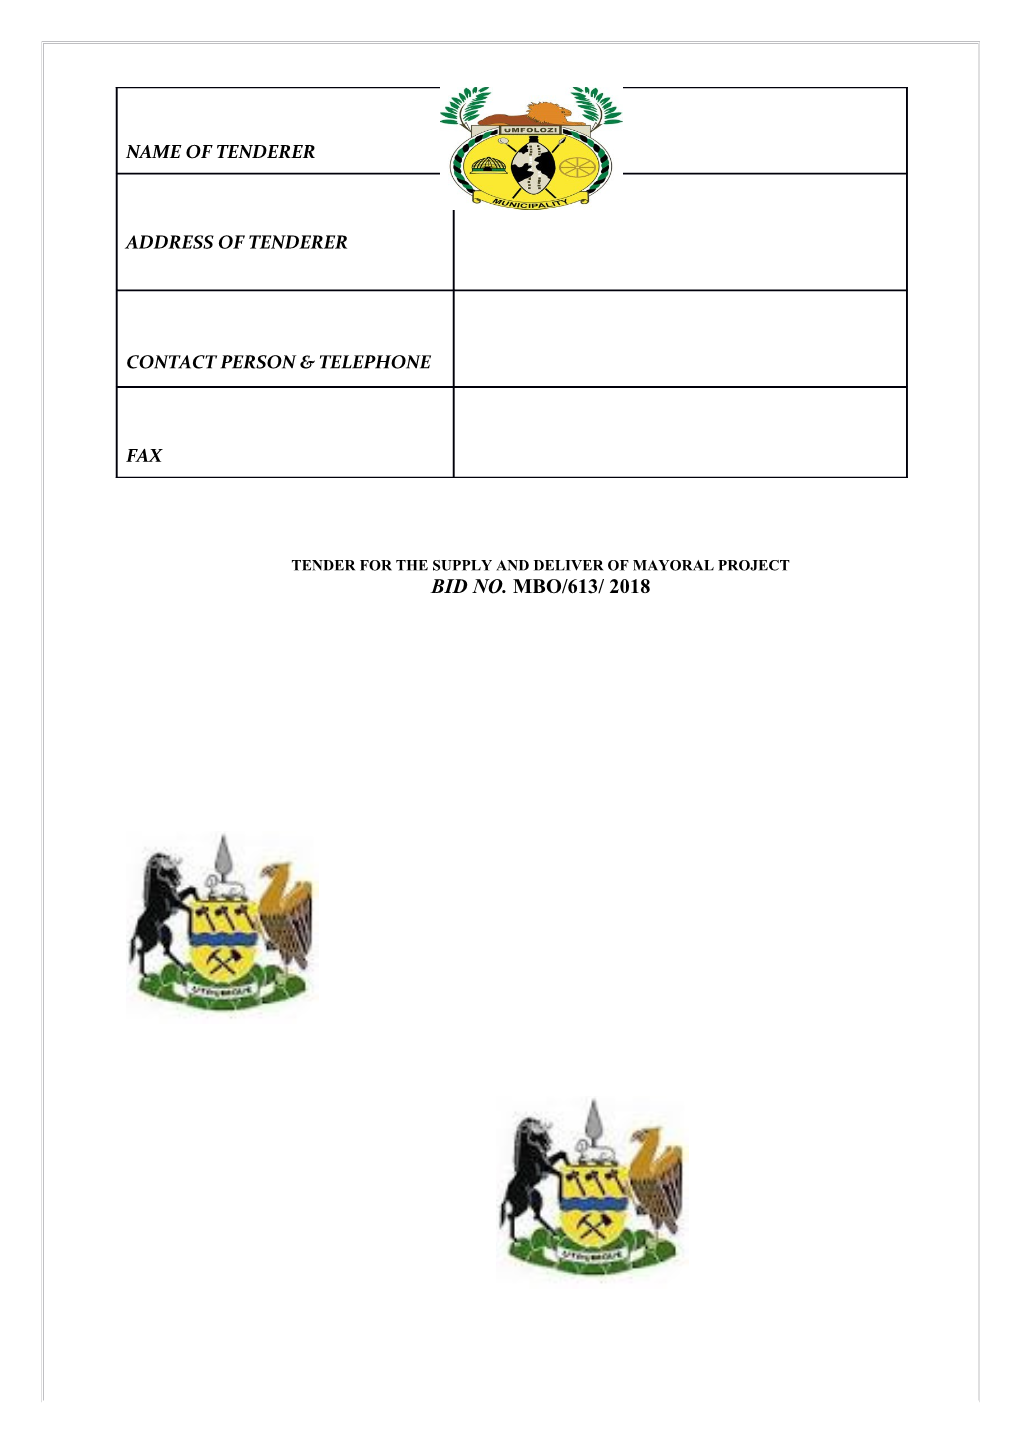 Tender for the Supply and Deliver of Mayoral Project